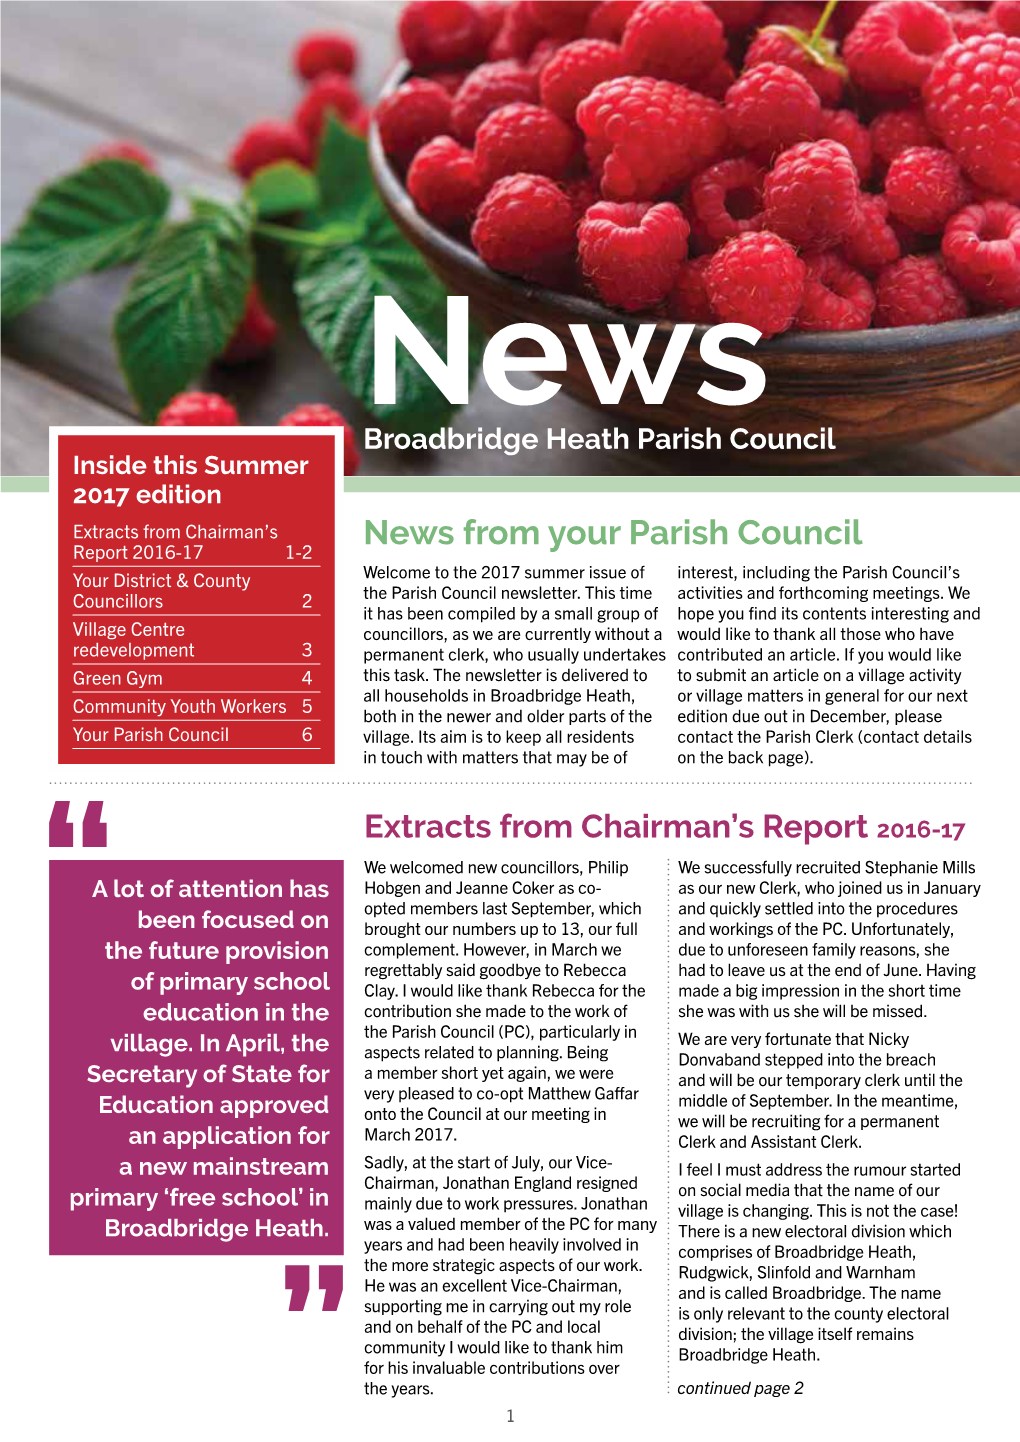 News from Your Parish Council